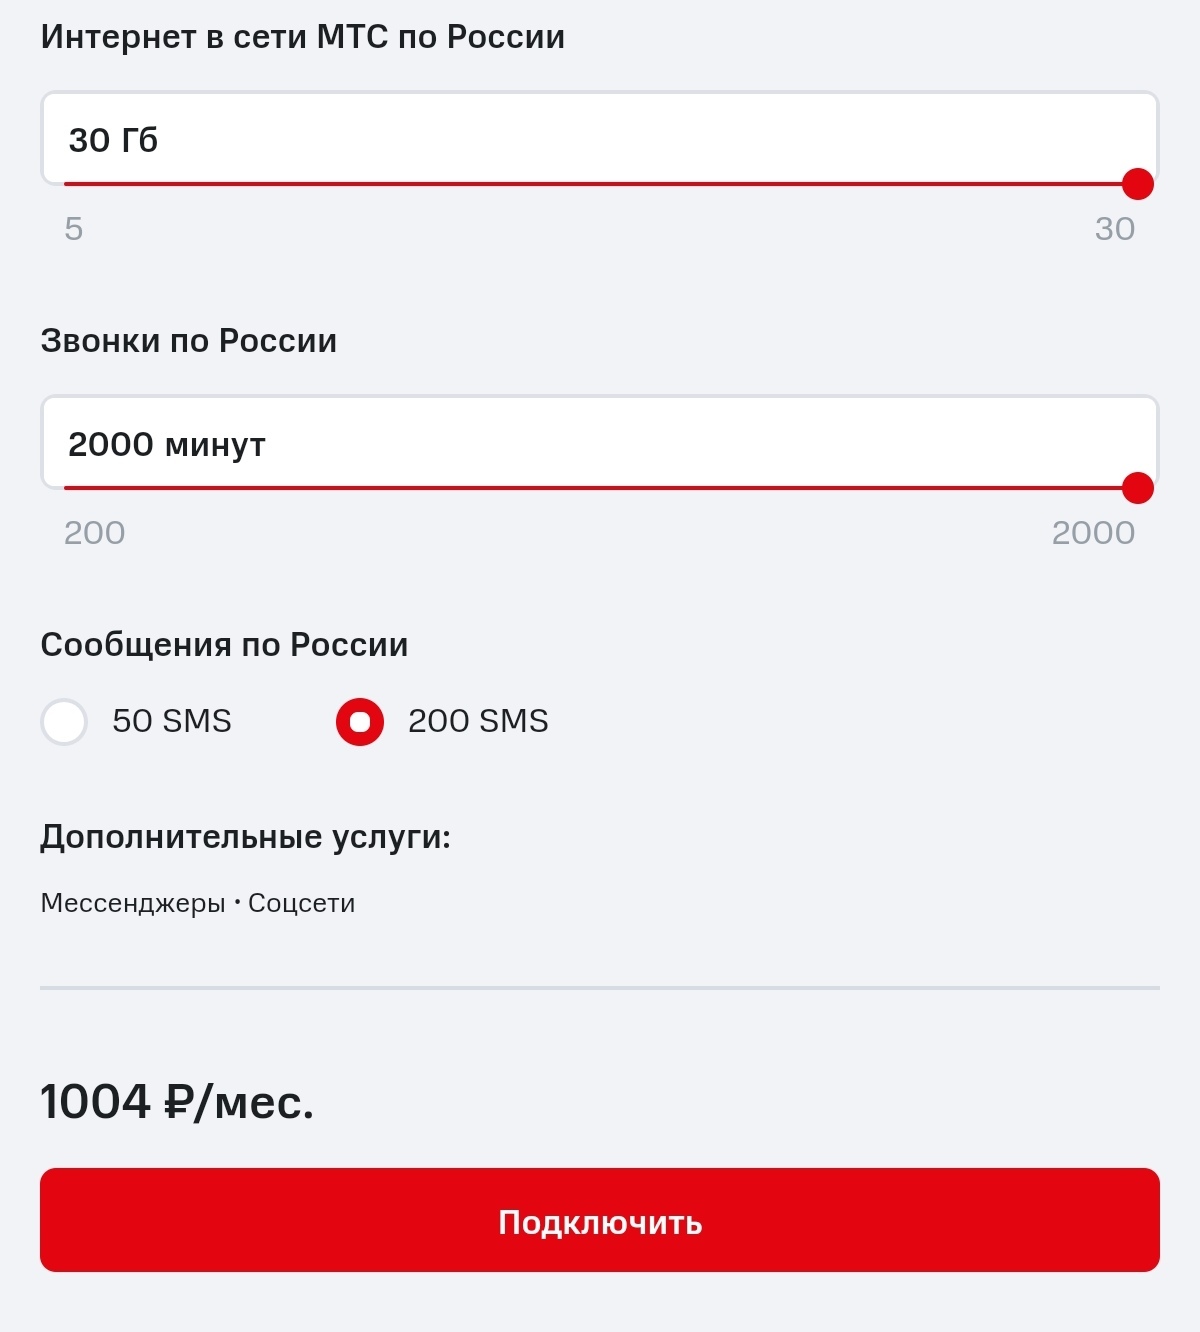 Comparison of prices for mobile internet and communication. UK VS Russia - Great Britain, Russia, Comparison, Prices, Internet, Mobile Internet, Connection, MTS, Beeline, Longpost